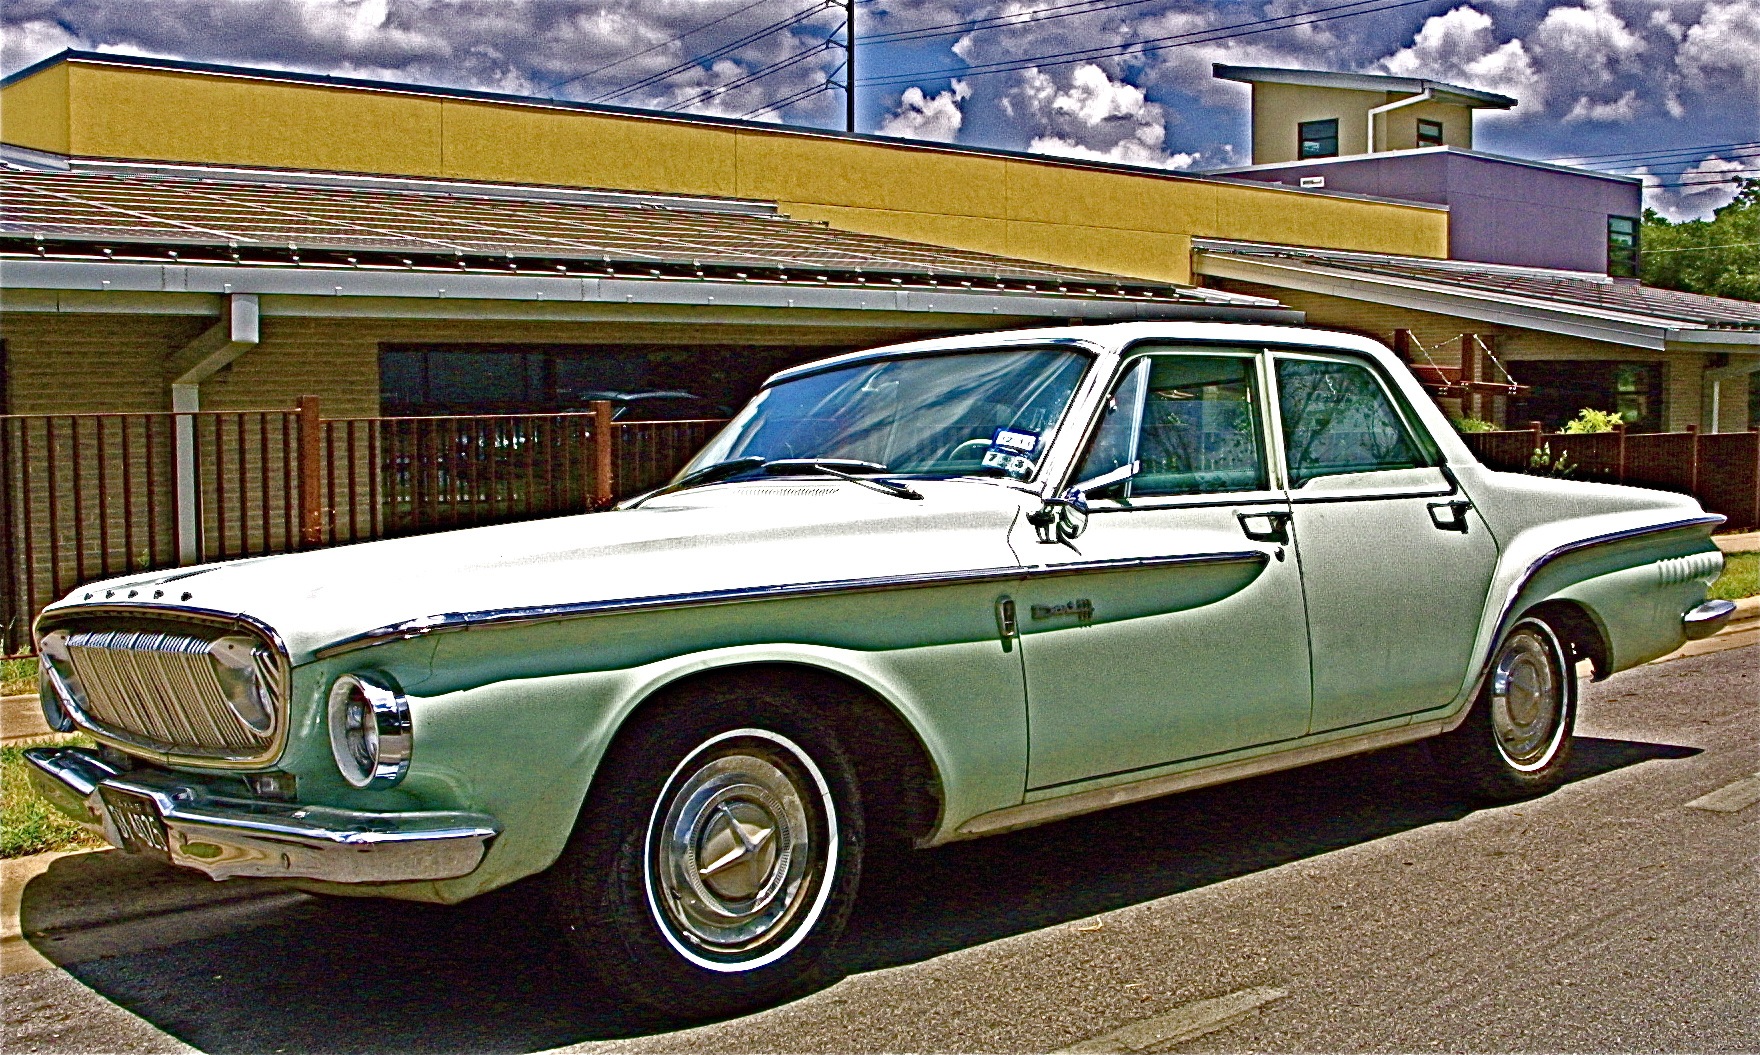 1962 Dodge Dart 330 in Bouldin Creek and Library